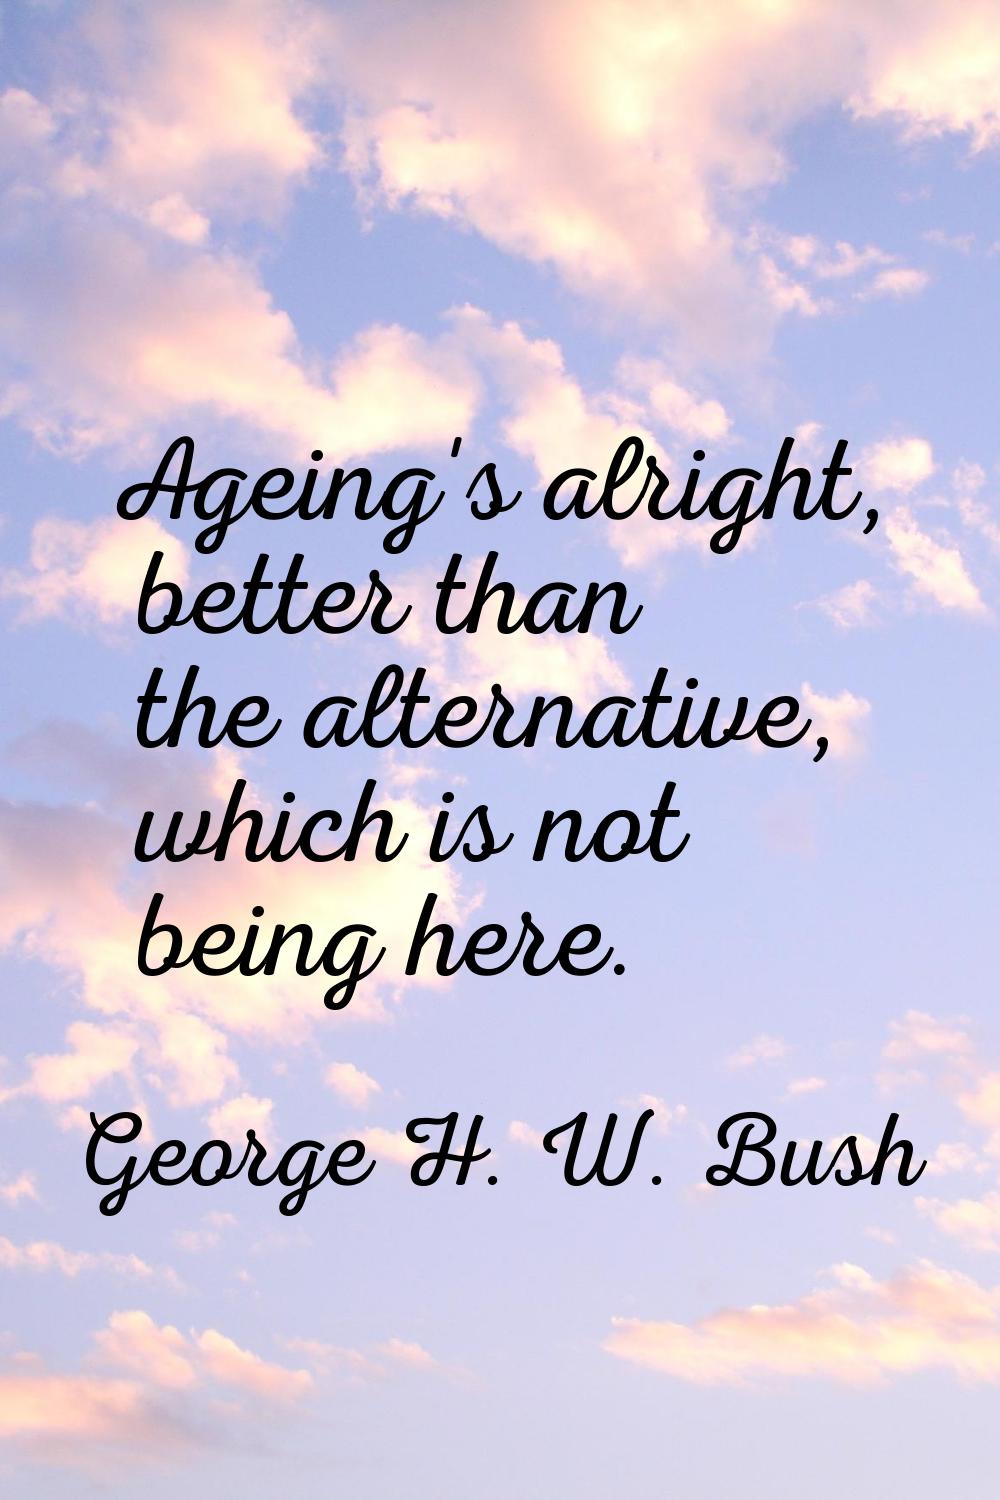 Ageing's alright, better than the alternative, which is not being here.